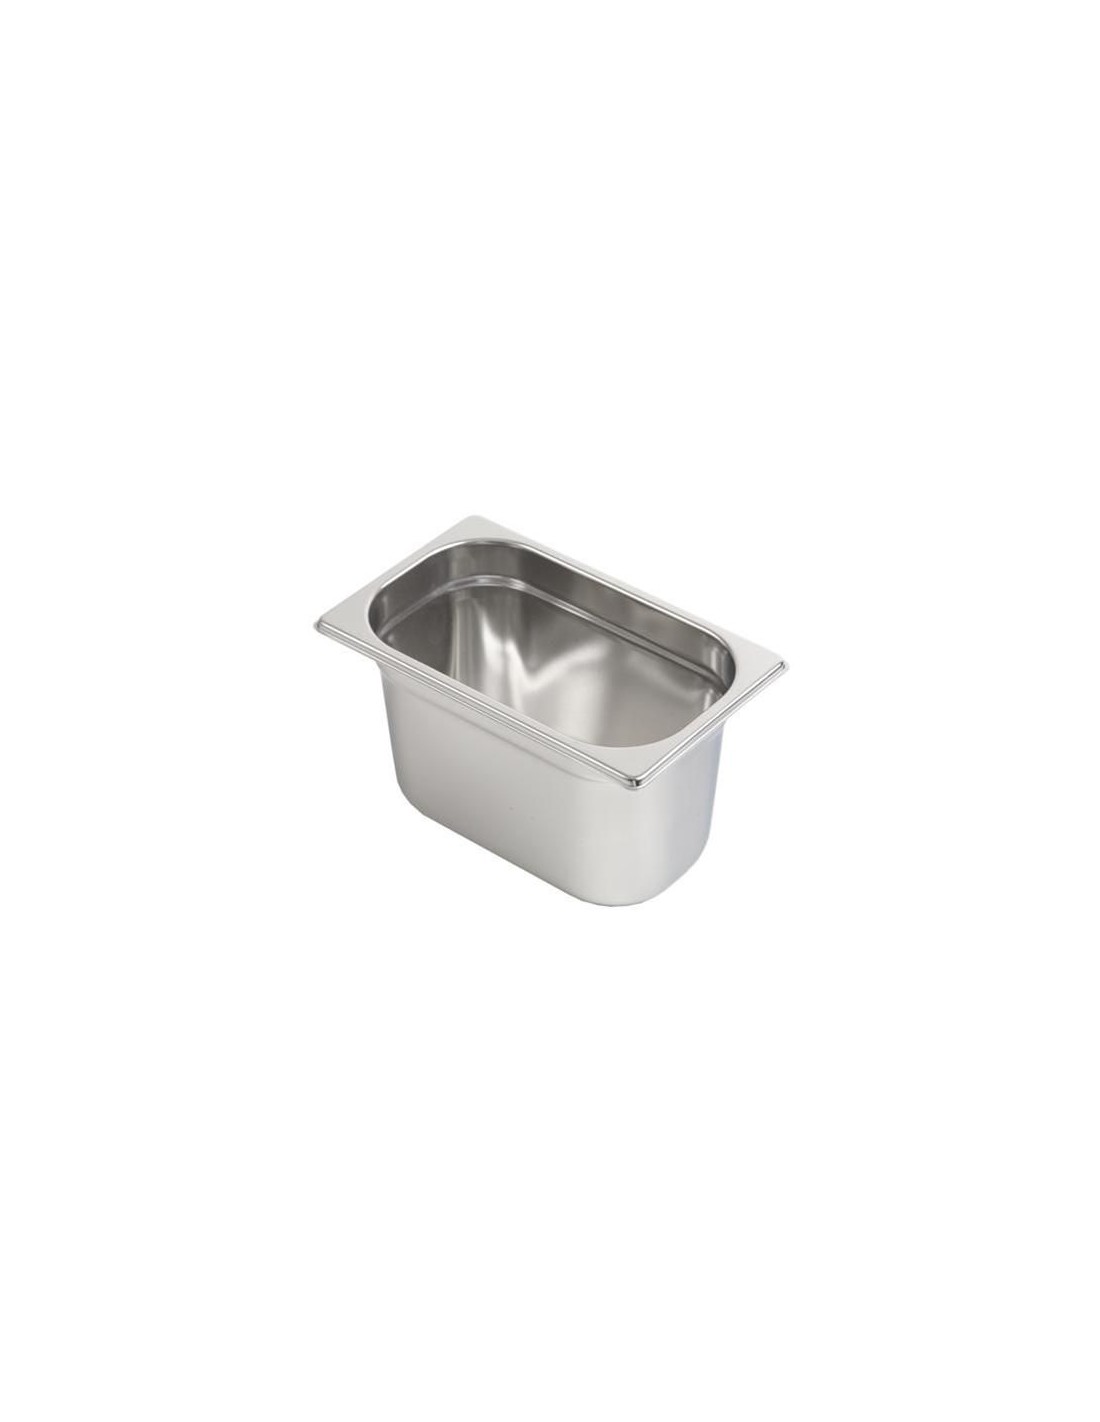 Gastronorm container GN 1/4 (Cm 26.5 x 16.2) height 15 cm